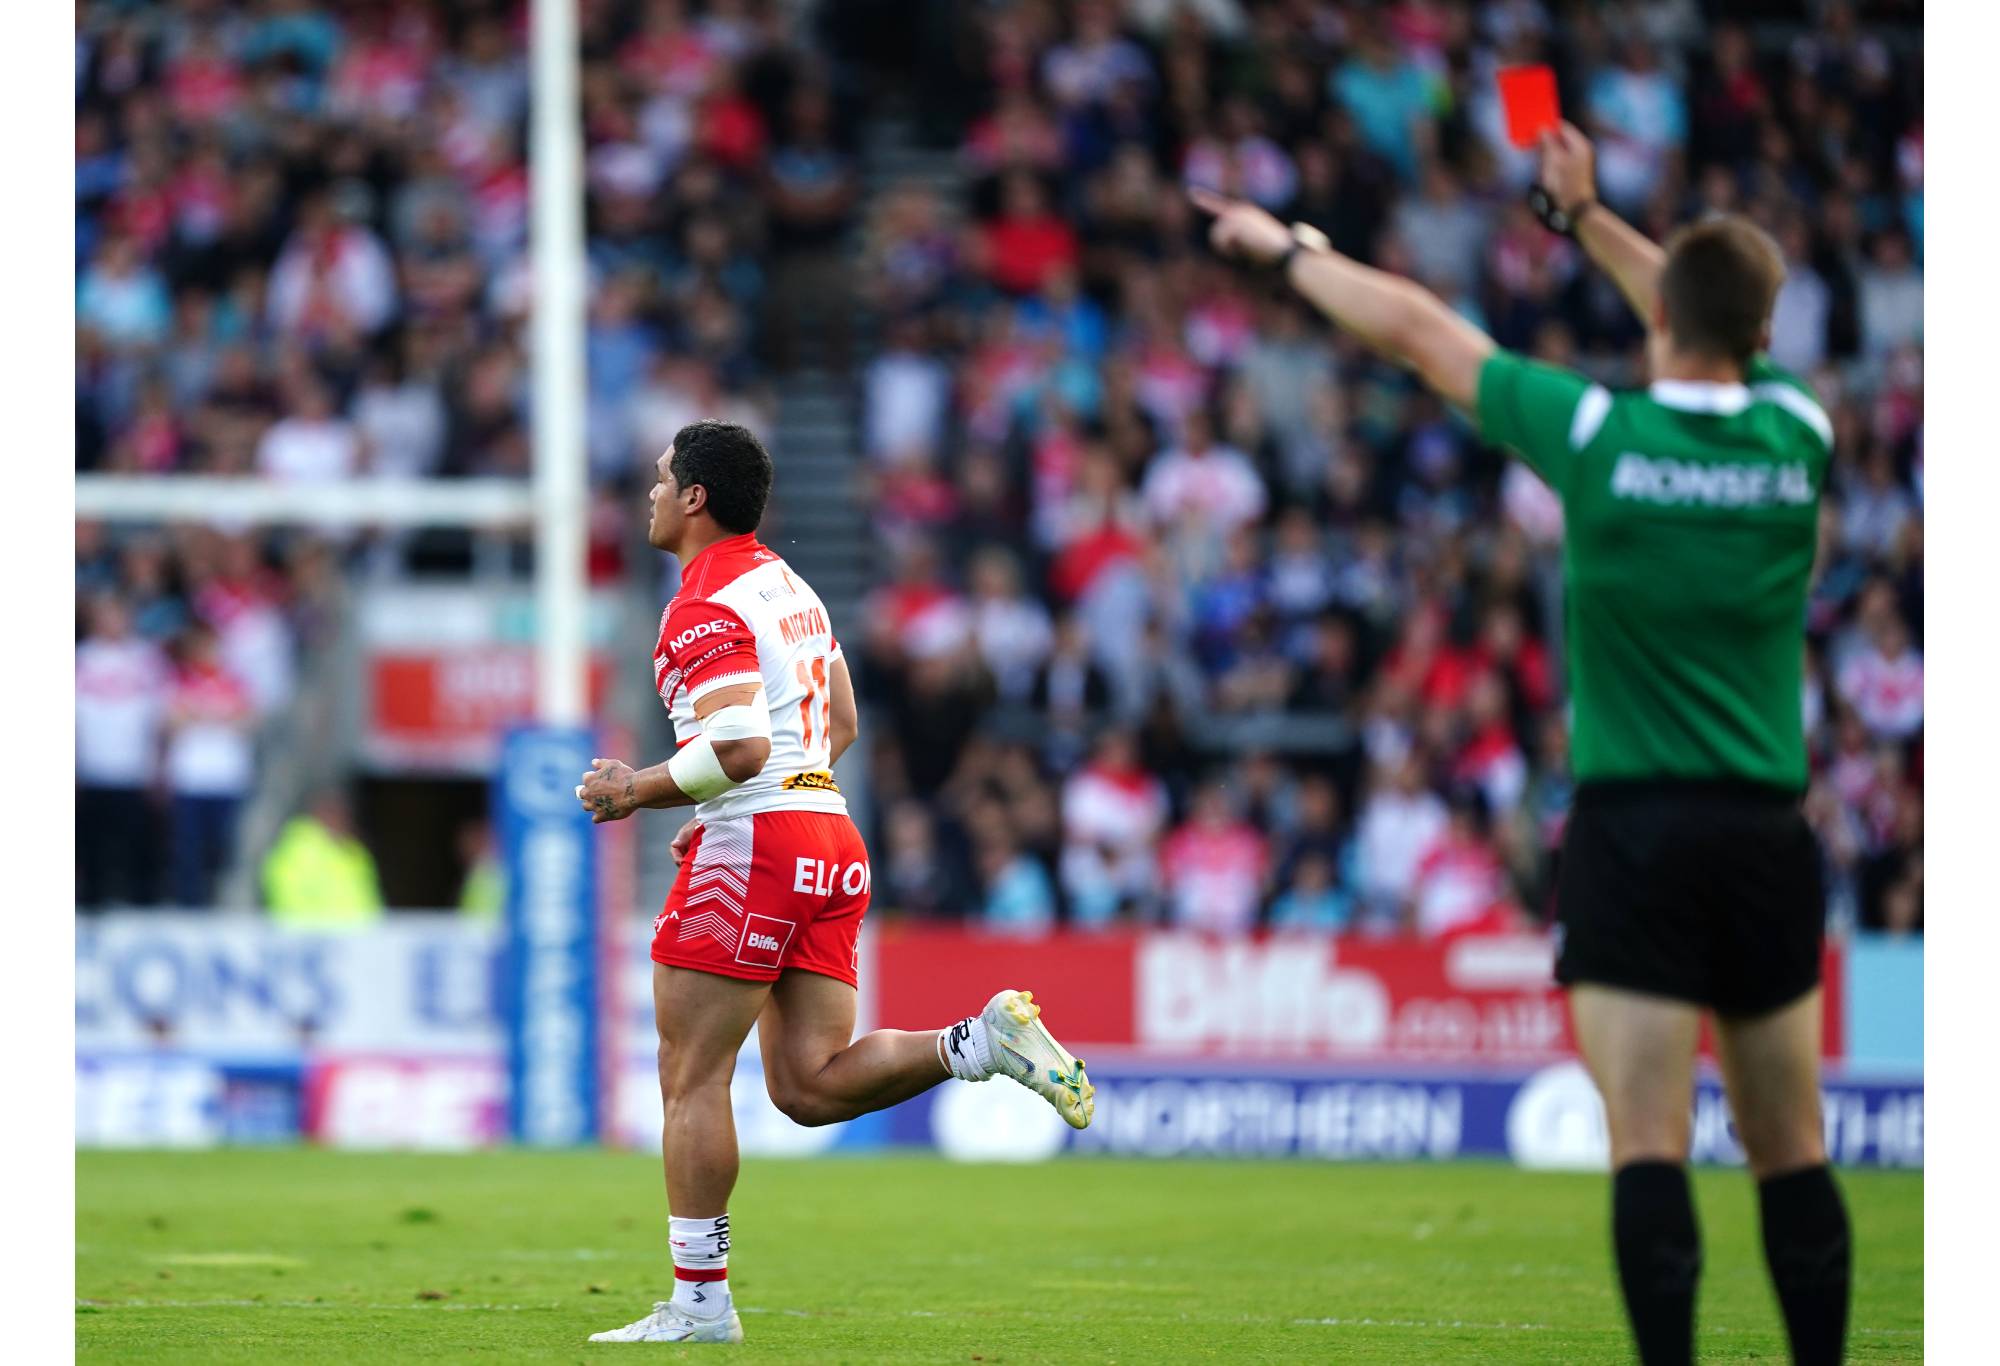 St Helens' Sione Mata'utia is sent off and shown a red card during the Betfred Super League match at the Totally Wicked Stadium, St Helens. Picture date: Friday July 15, 2022. (Photo by Mike Egerton/PA Images via Getty Images)